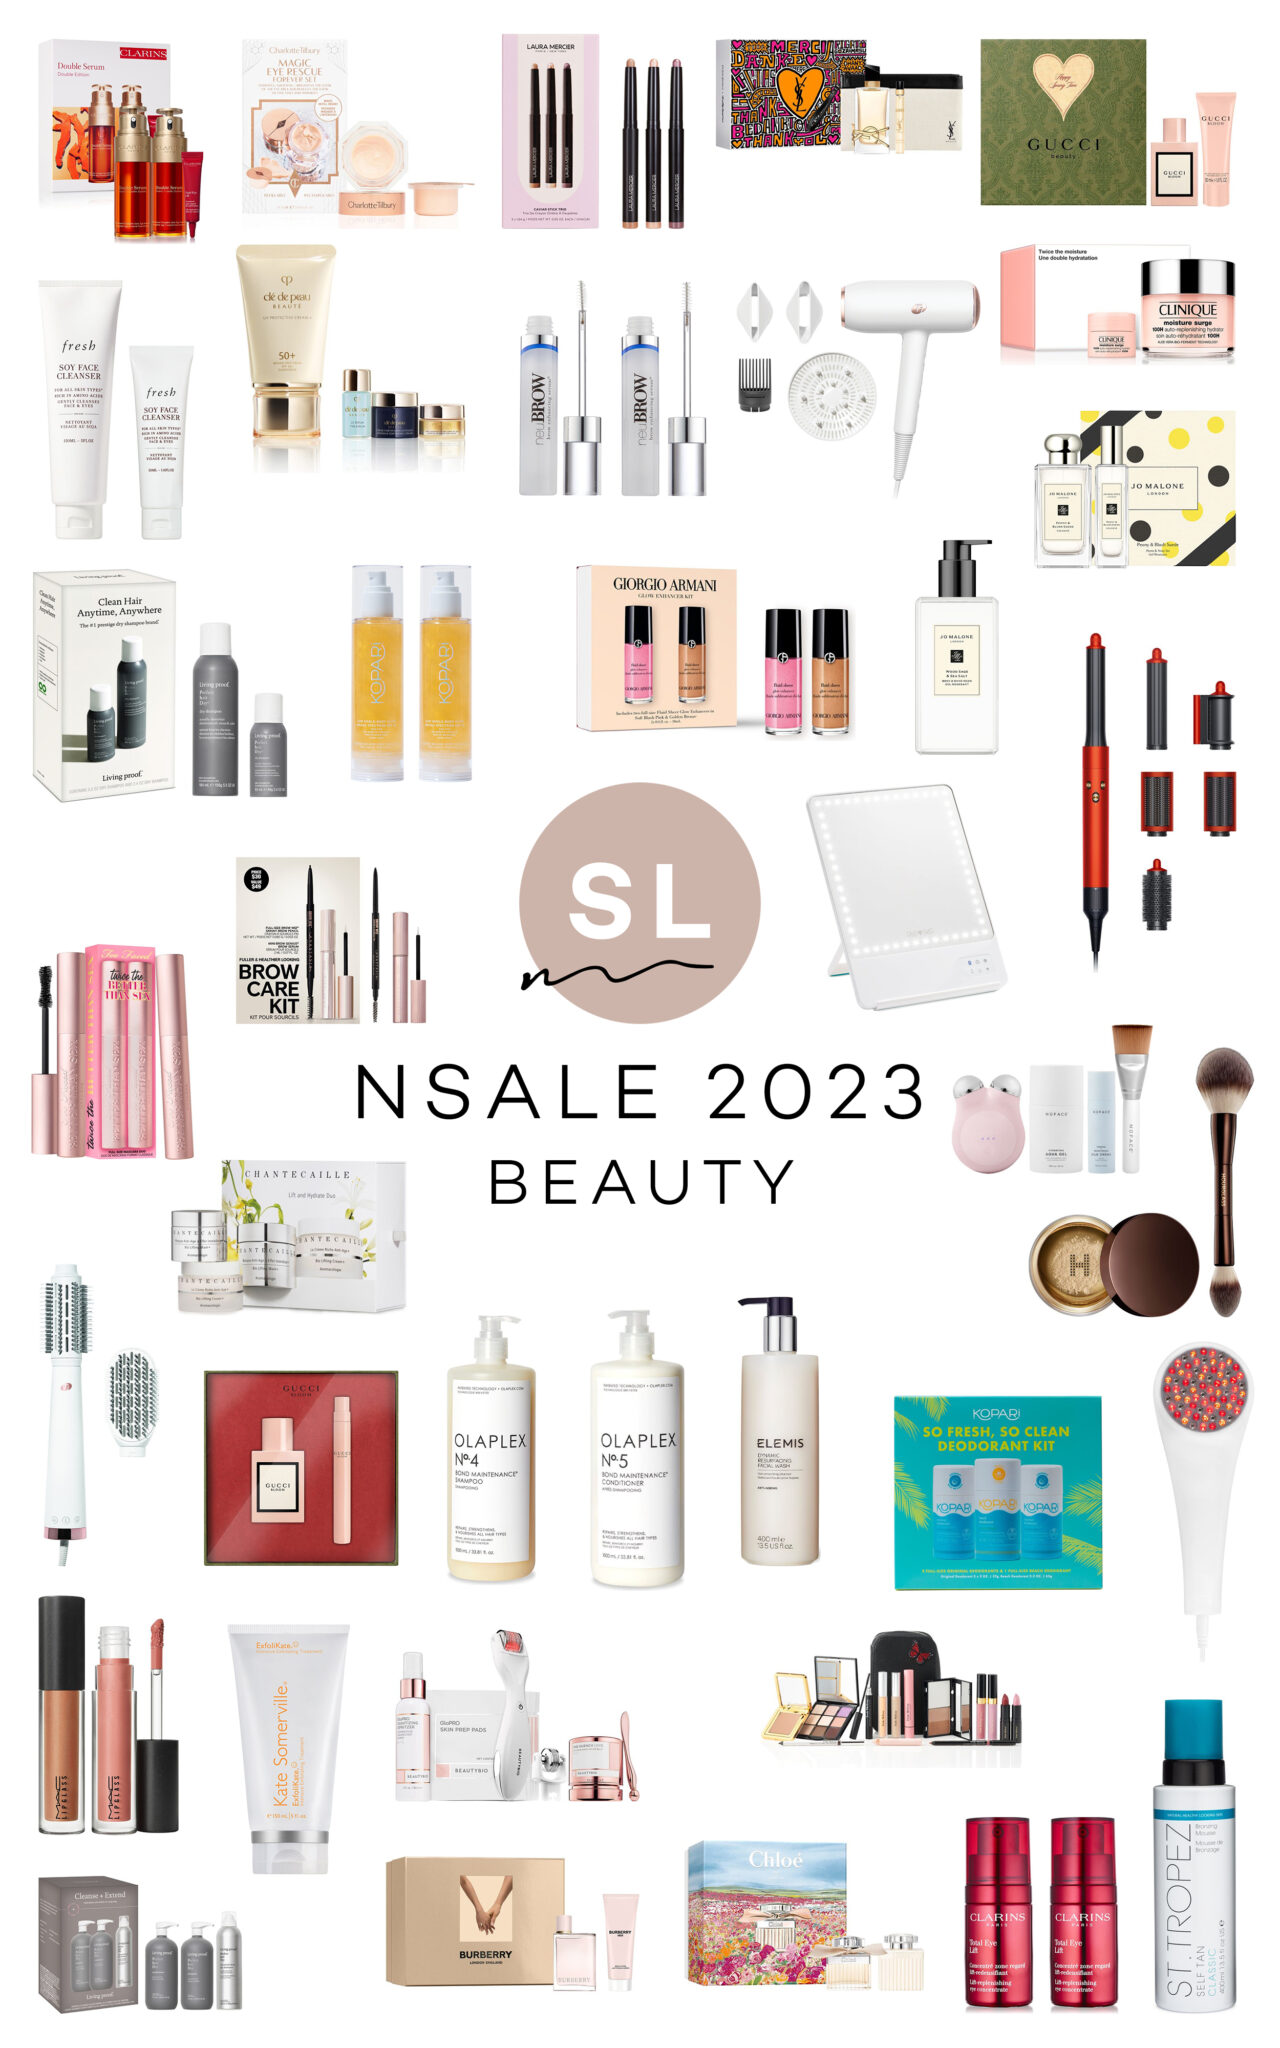 Nordstrom Anniversary Sale 2023 collage of beauty items